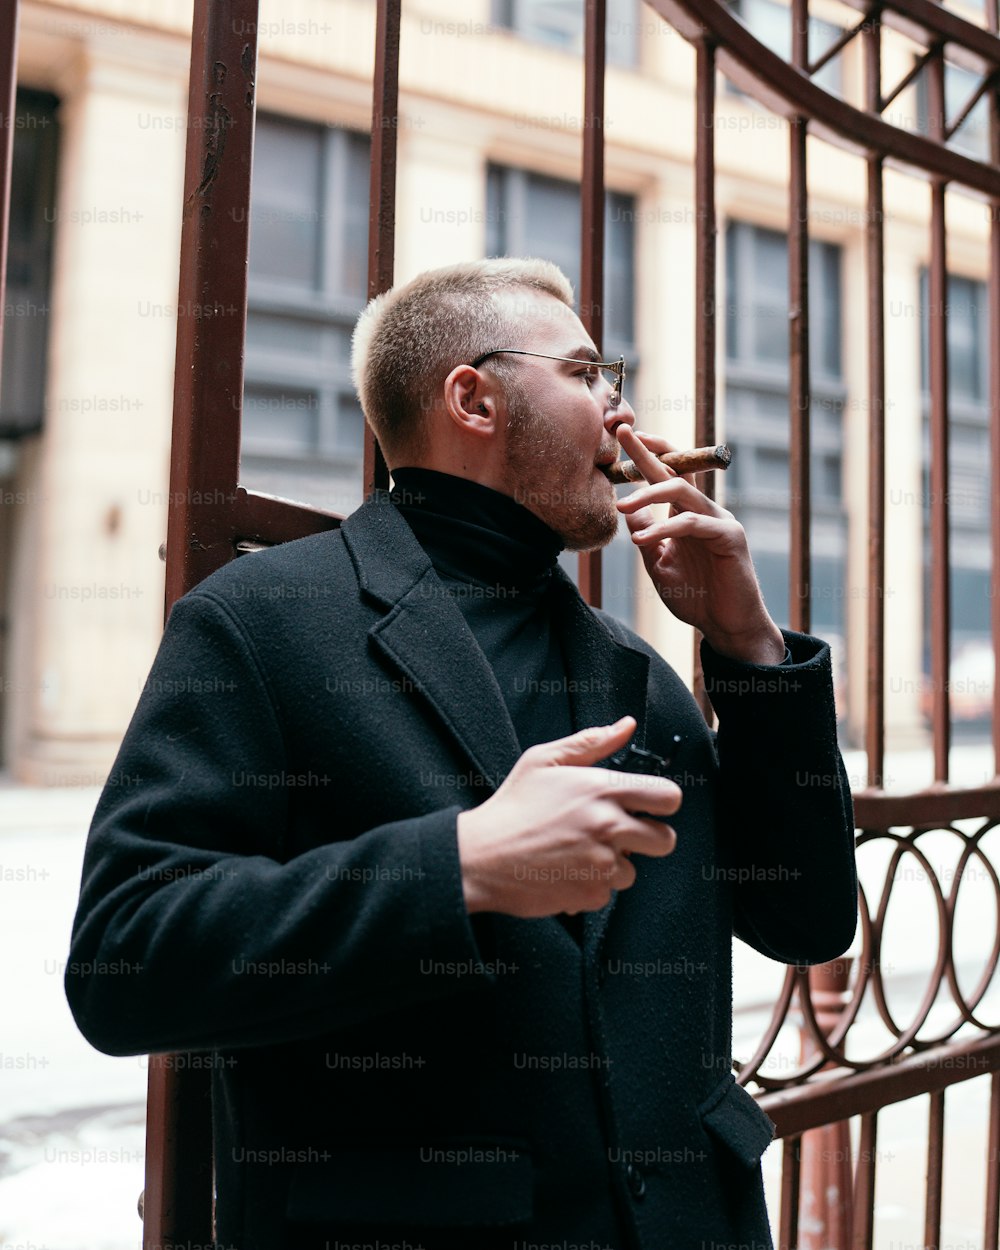 a man smoking a cigarette in front of a gate